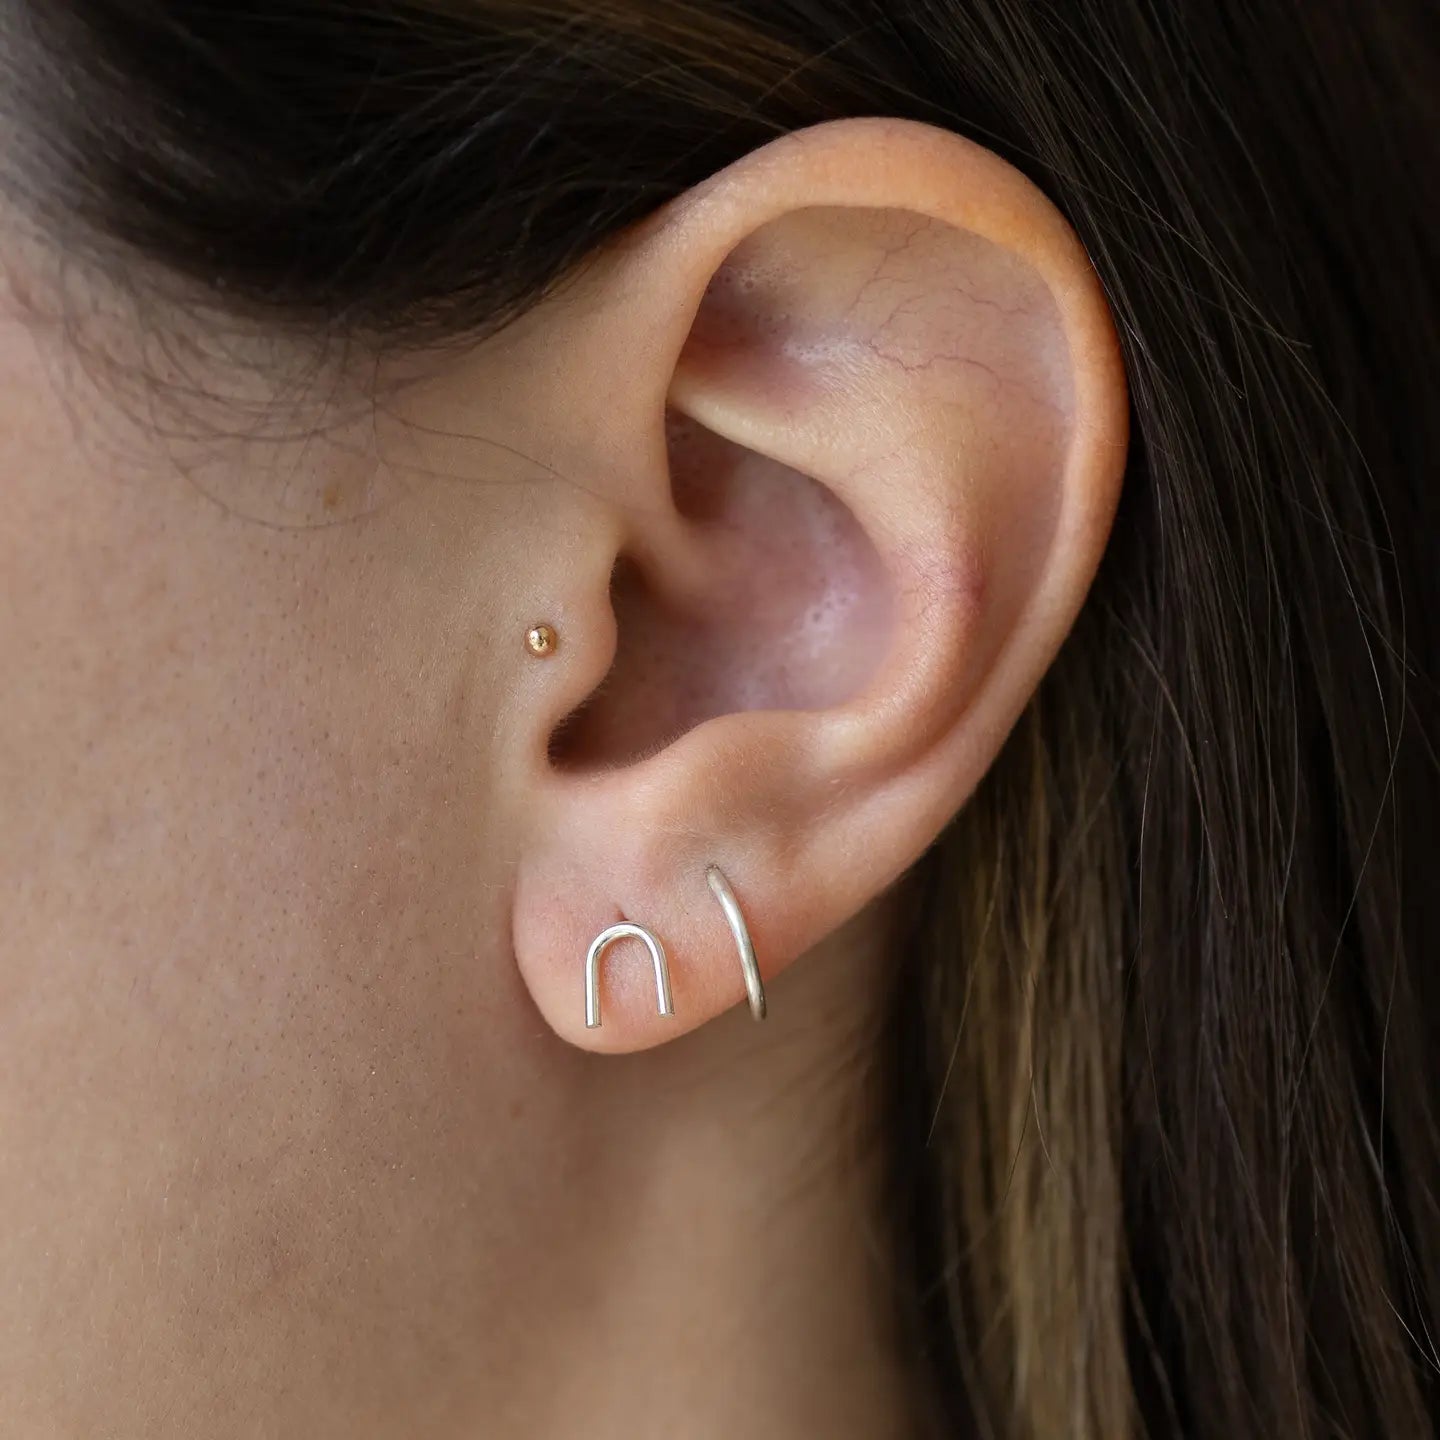 Woman wearing the Sterling Silver Arch Stud Earrings by The Land Of Salt